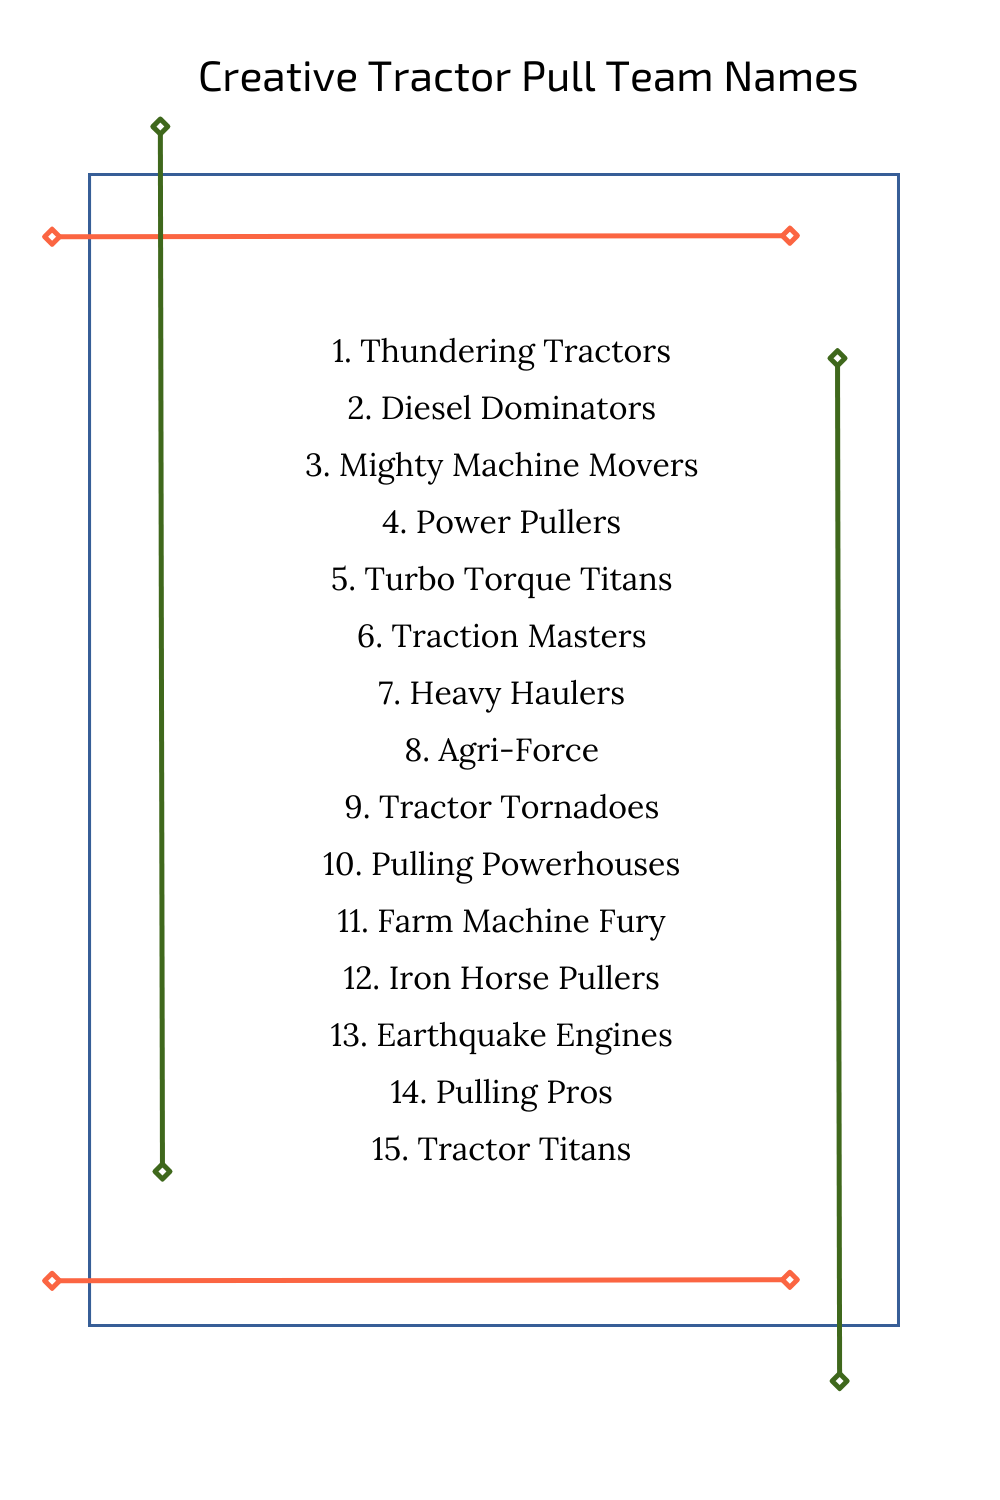 Creative Tractor Pull Team Names